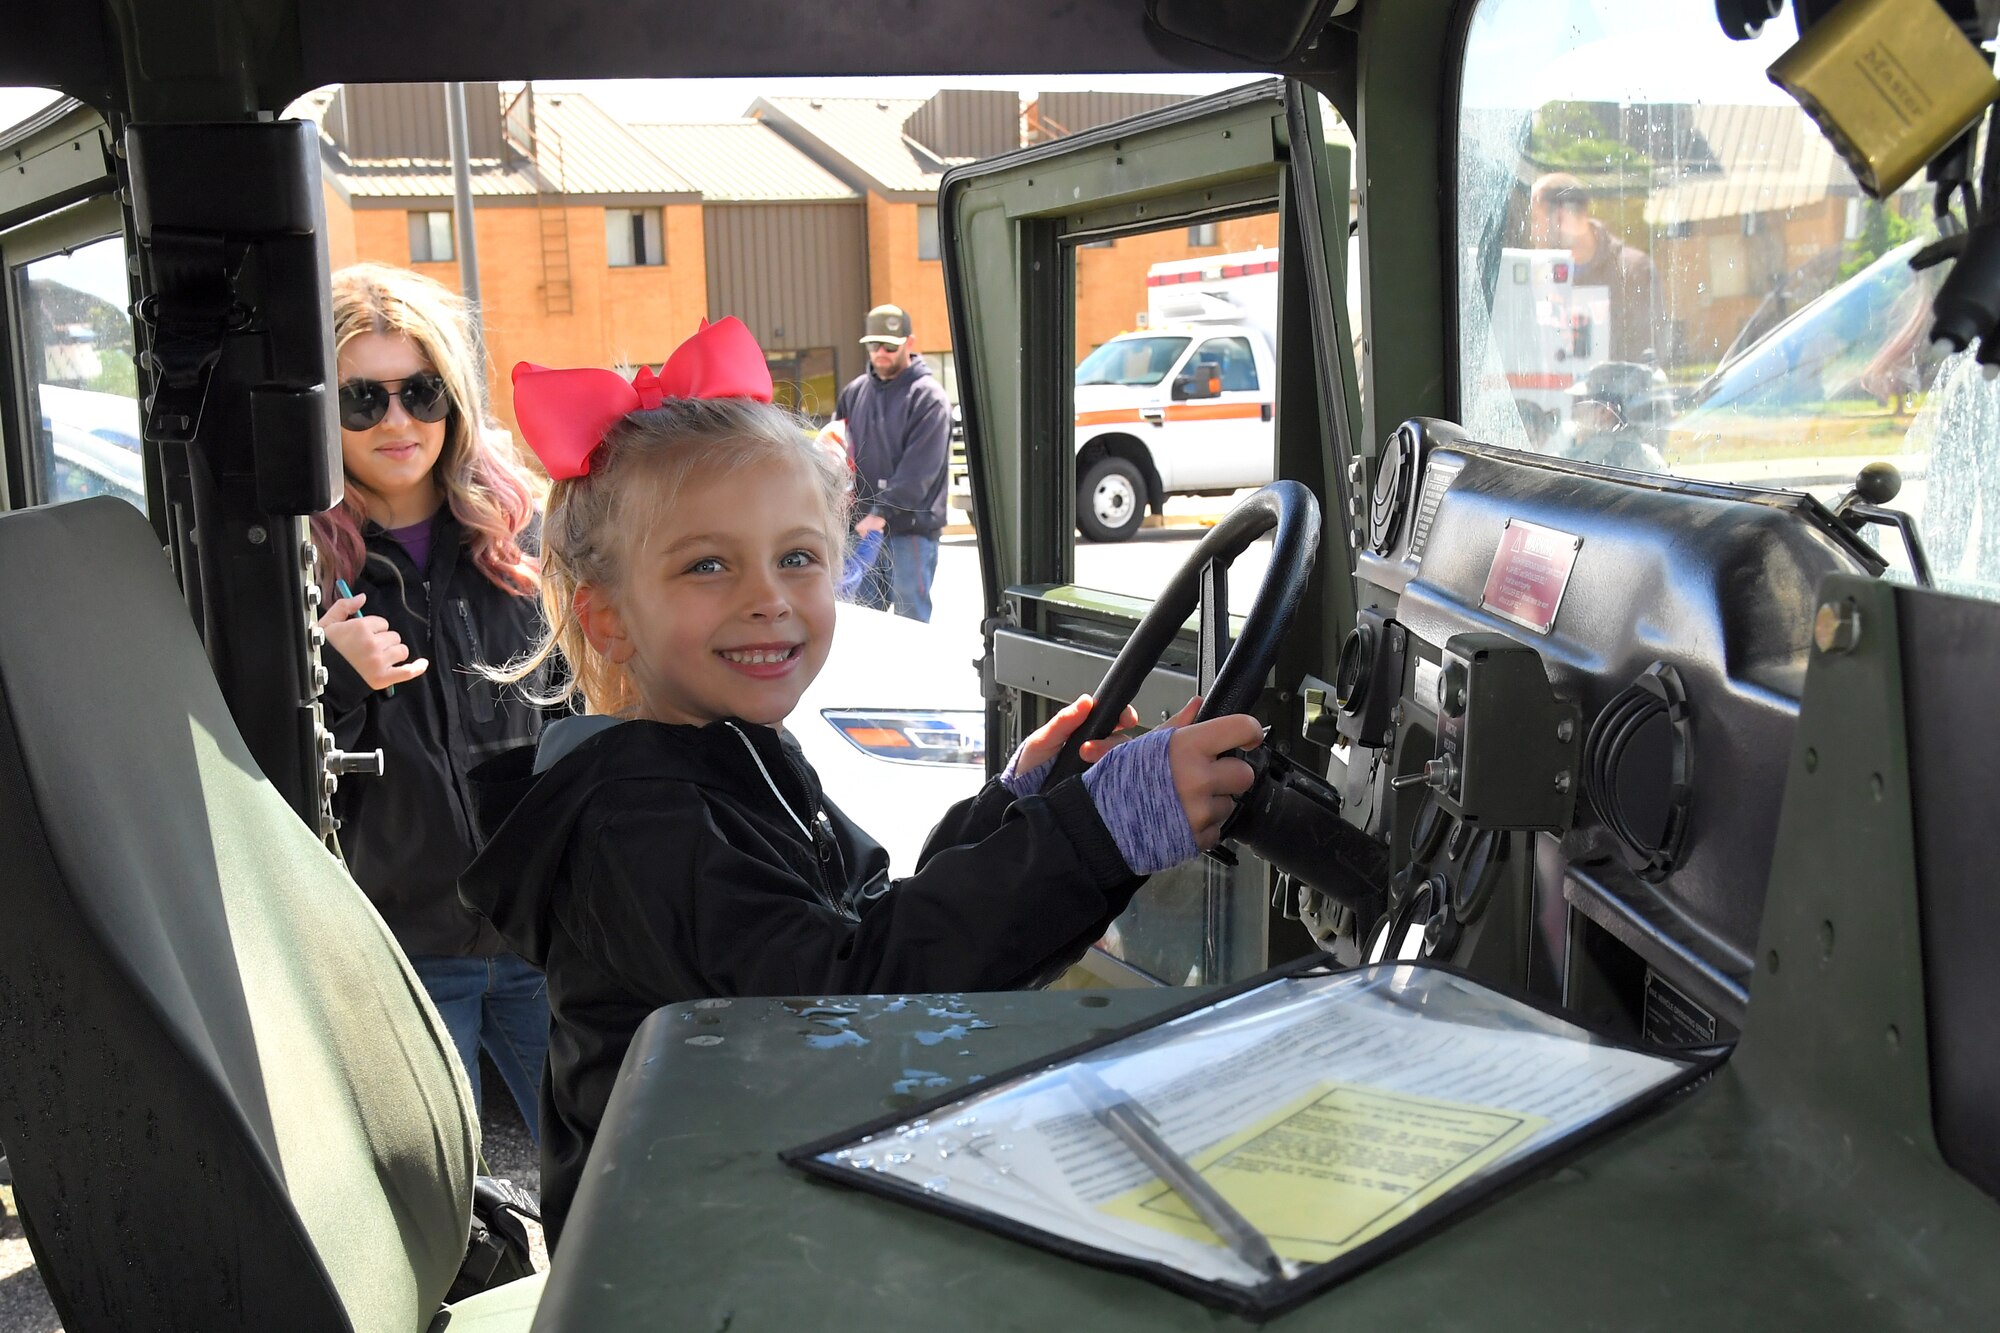 Lila Eccles watches as daughter Zoey Eccles sits in a HUMVEE at the Wheels of Wonder event, May 17, 2019, Hill Air Force Base, Utah. (U.S. Air Force photo by Todd Cromar)